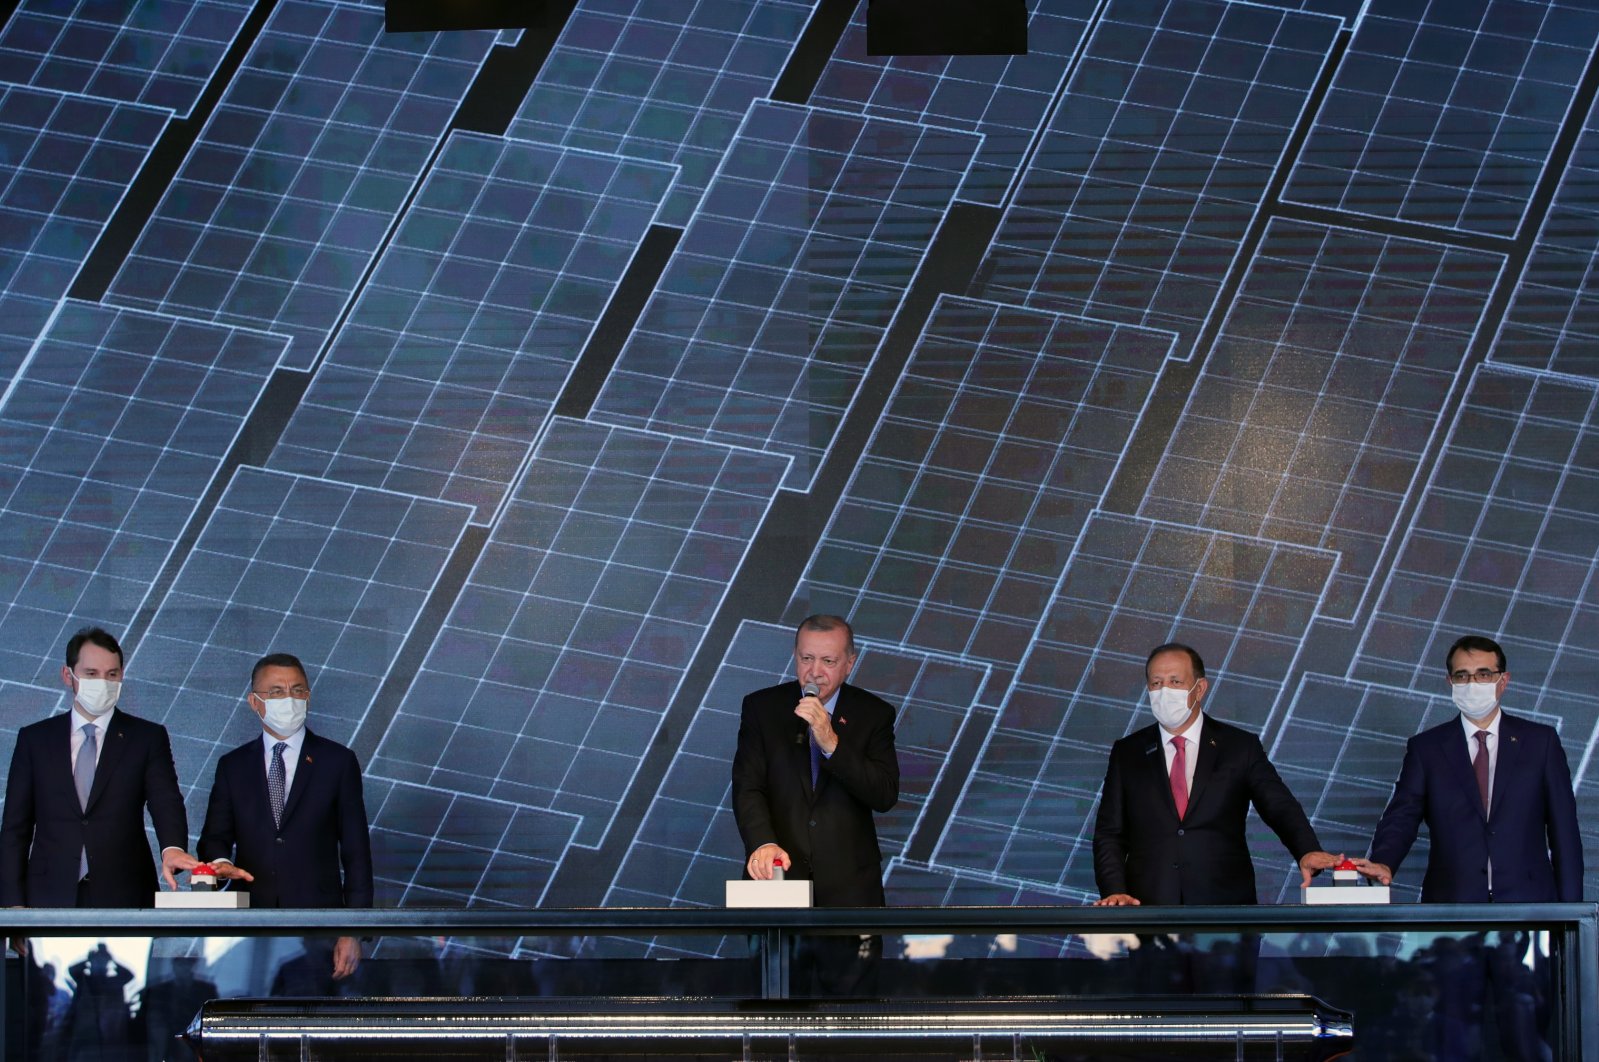 Treasury and Finance Minister Berat Albayrak (L), Vice President Fuat Oktay (2nd from L), President Recep Tayyip Erdoğan (C), Kalyon Holding chairman Cemal Kalyoncu (2nd from R) and Energy and Natural Resources Minister Fatih Dönmez (R) attend the opening ceremony of the first integrated solar panel manufacturing facility, Ankara, Turkey, Aug. 19, 2020. (AA Photo)

